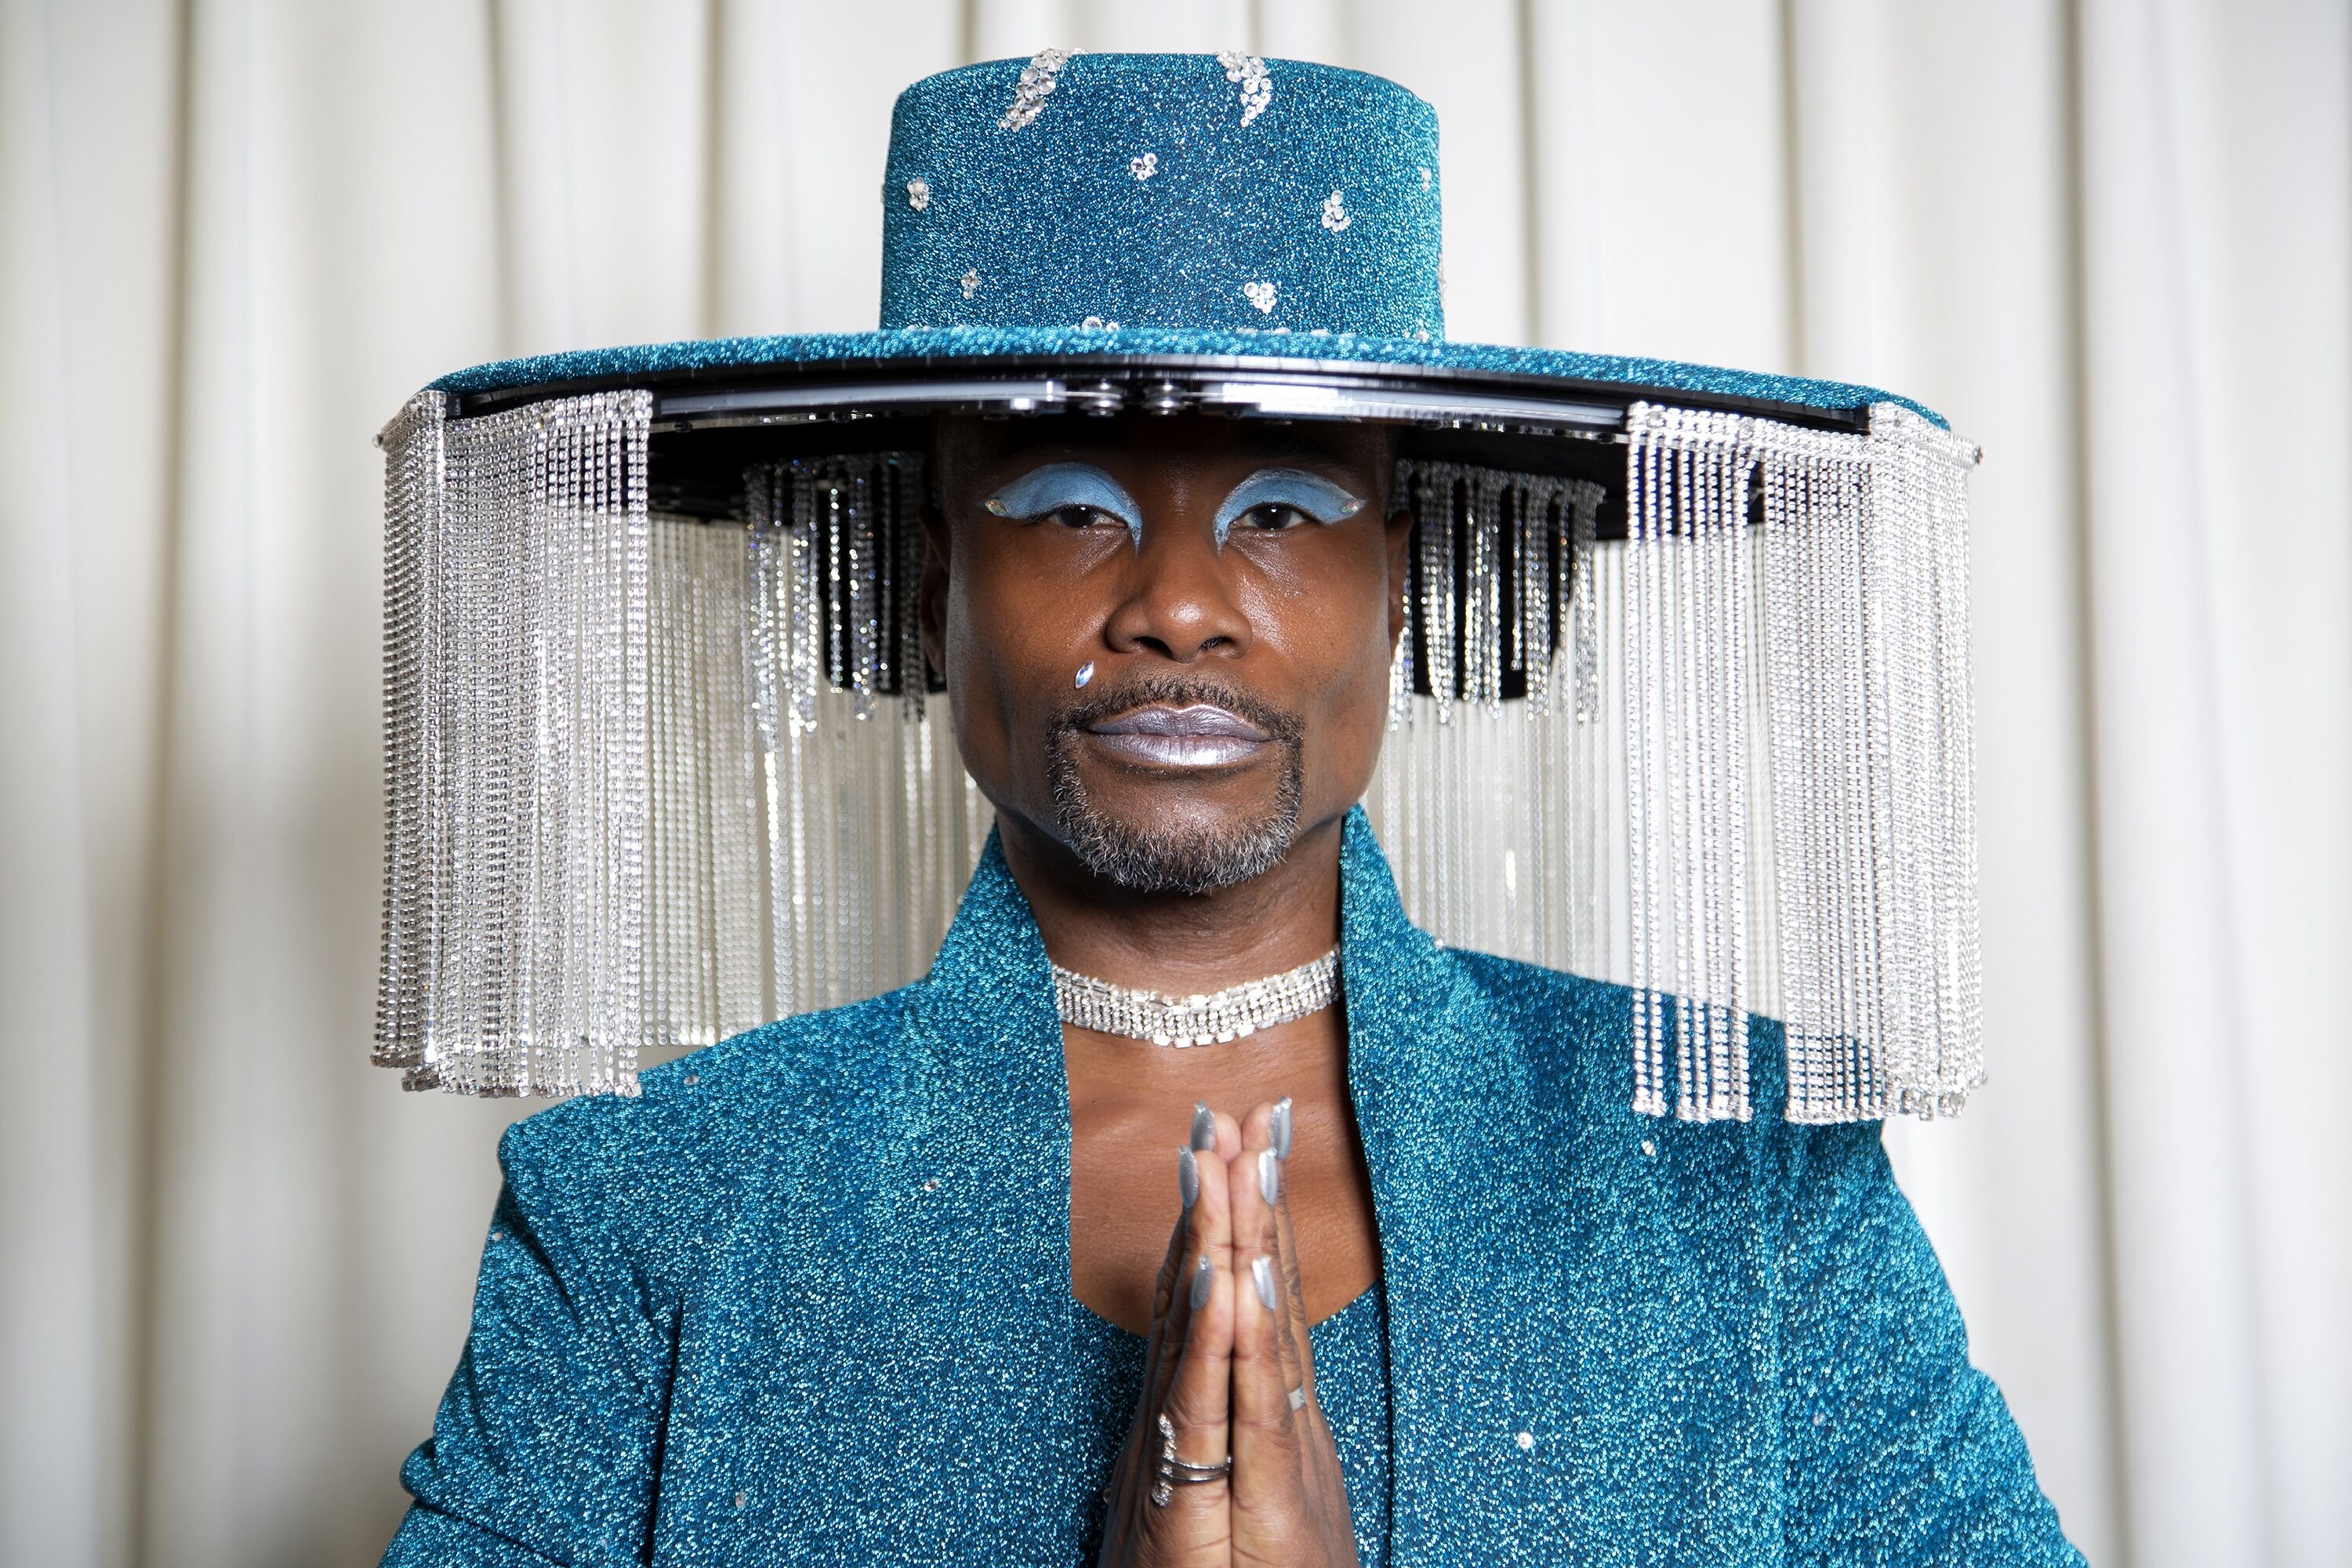 Billy Porter gets ready for The 62nd Annual GRAMMY Awards styled by Sam Ratelle, wearing BAJA EAST and custom hat by Sarah Sokol Millinery on January 26, 2020 in Los Angeles, California | Photo: Getty Images